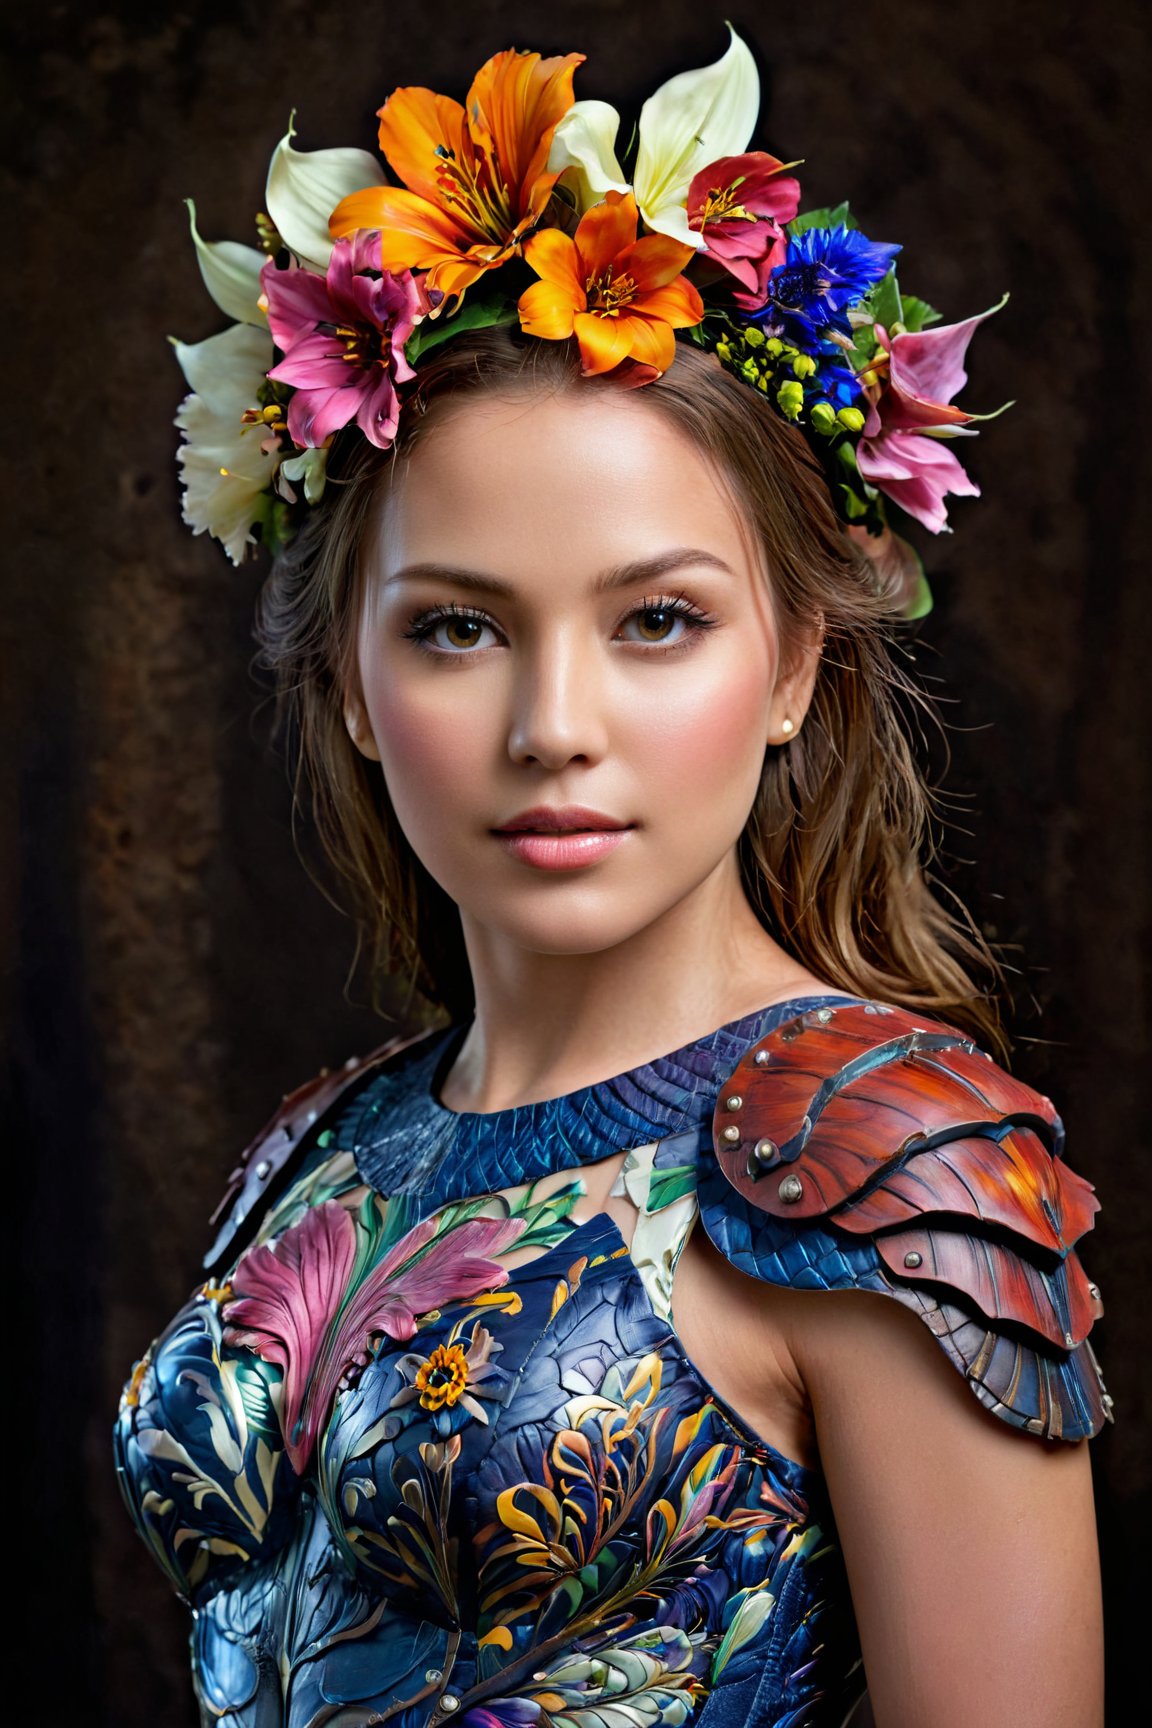 (best quality,  realistic,  high-resolution),  colorful portrait of a woman with flawless anatomy. She is wearing a stunning flower dress that compliments her vibrant personality. Her skin is extremely detailed and realistic,  with a natural and lifelike texture. The background is dark,  which creates a striking contrast to the colorful flowers adorning her armor. The flowers on her armor represent her strength and beauty. The lighting accentuates the contours of her face,  adding depth and dimension to the portrait. The overall composition is masterfully done,  showcasing the intricate details and achieving a high level of realism., Realistic,<lora:EMS-74104-EMS:0.800000>